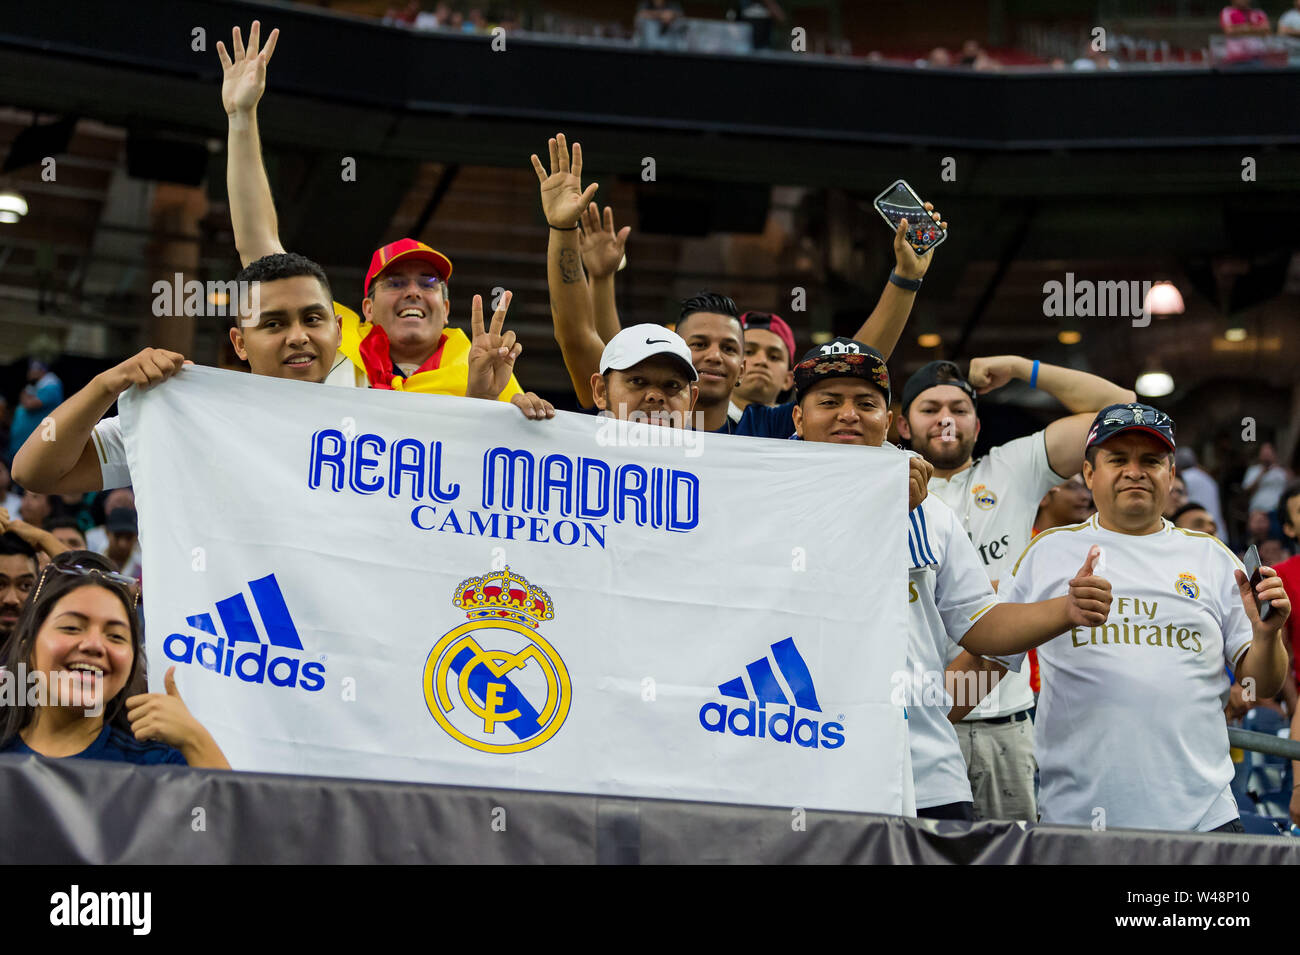 July 20, 2019: Real Madrid fans prior to the International Champions Cup  match between Real Madrid and Bayern Munich FC at NRG Stadium in Houston,  Texas The score at the half is